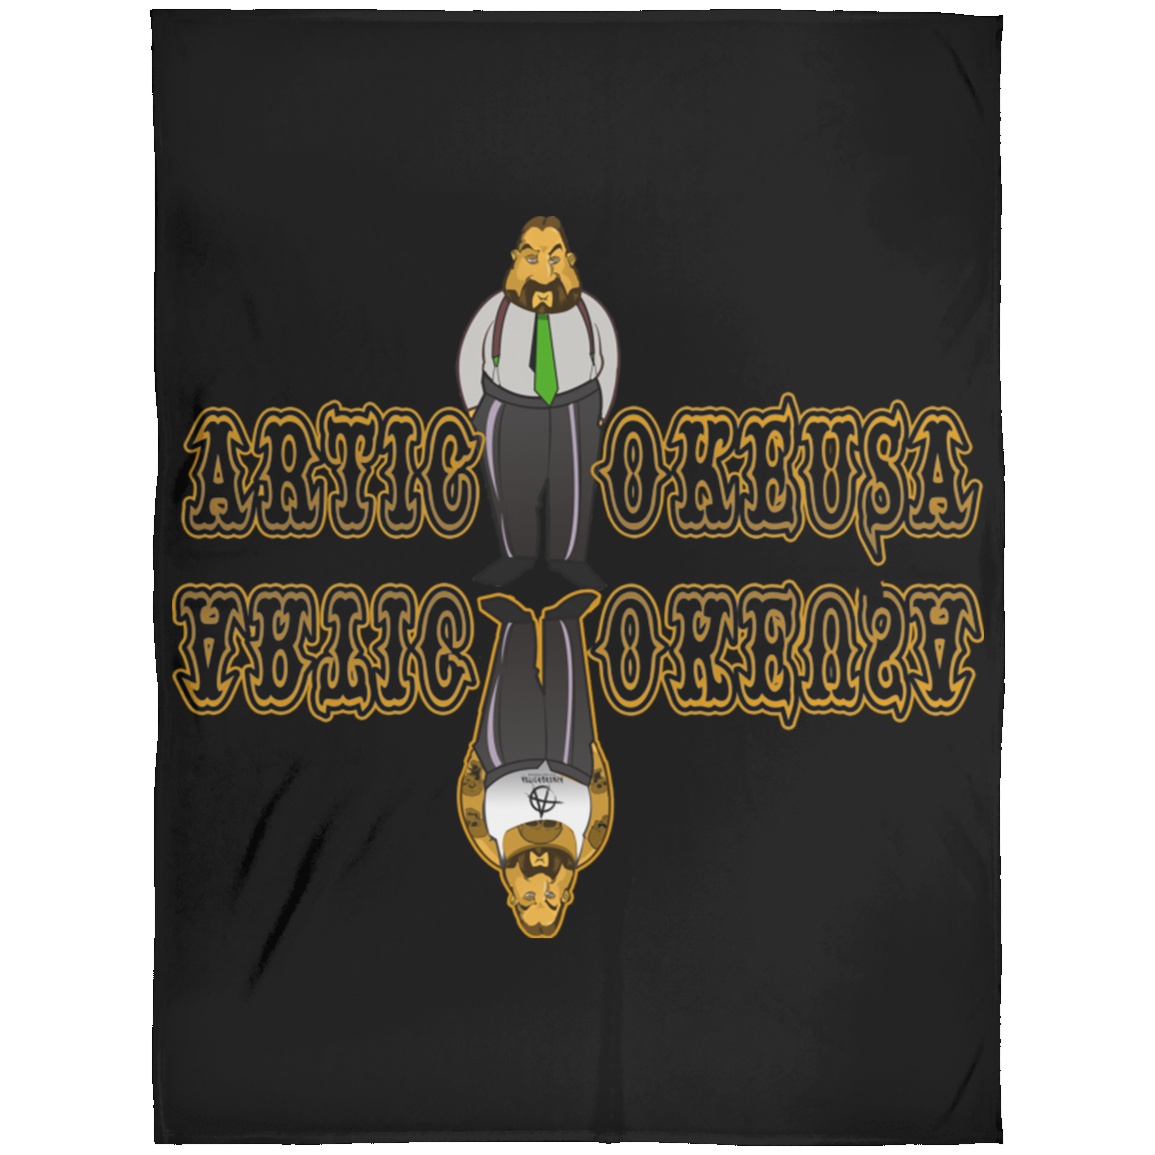 ArtichokeUSA Custom Design. Façade: (Noun) A false appearance that makes someone or something seem more pleasant or better than they really are. Arctic Fleece Blanket 60x80